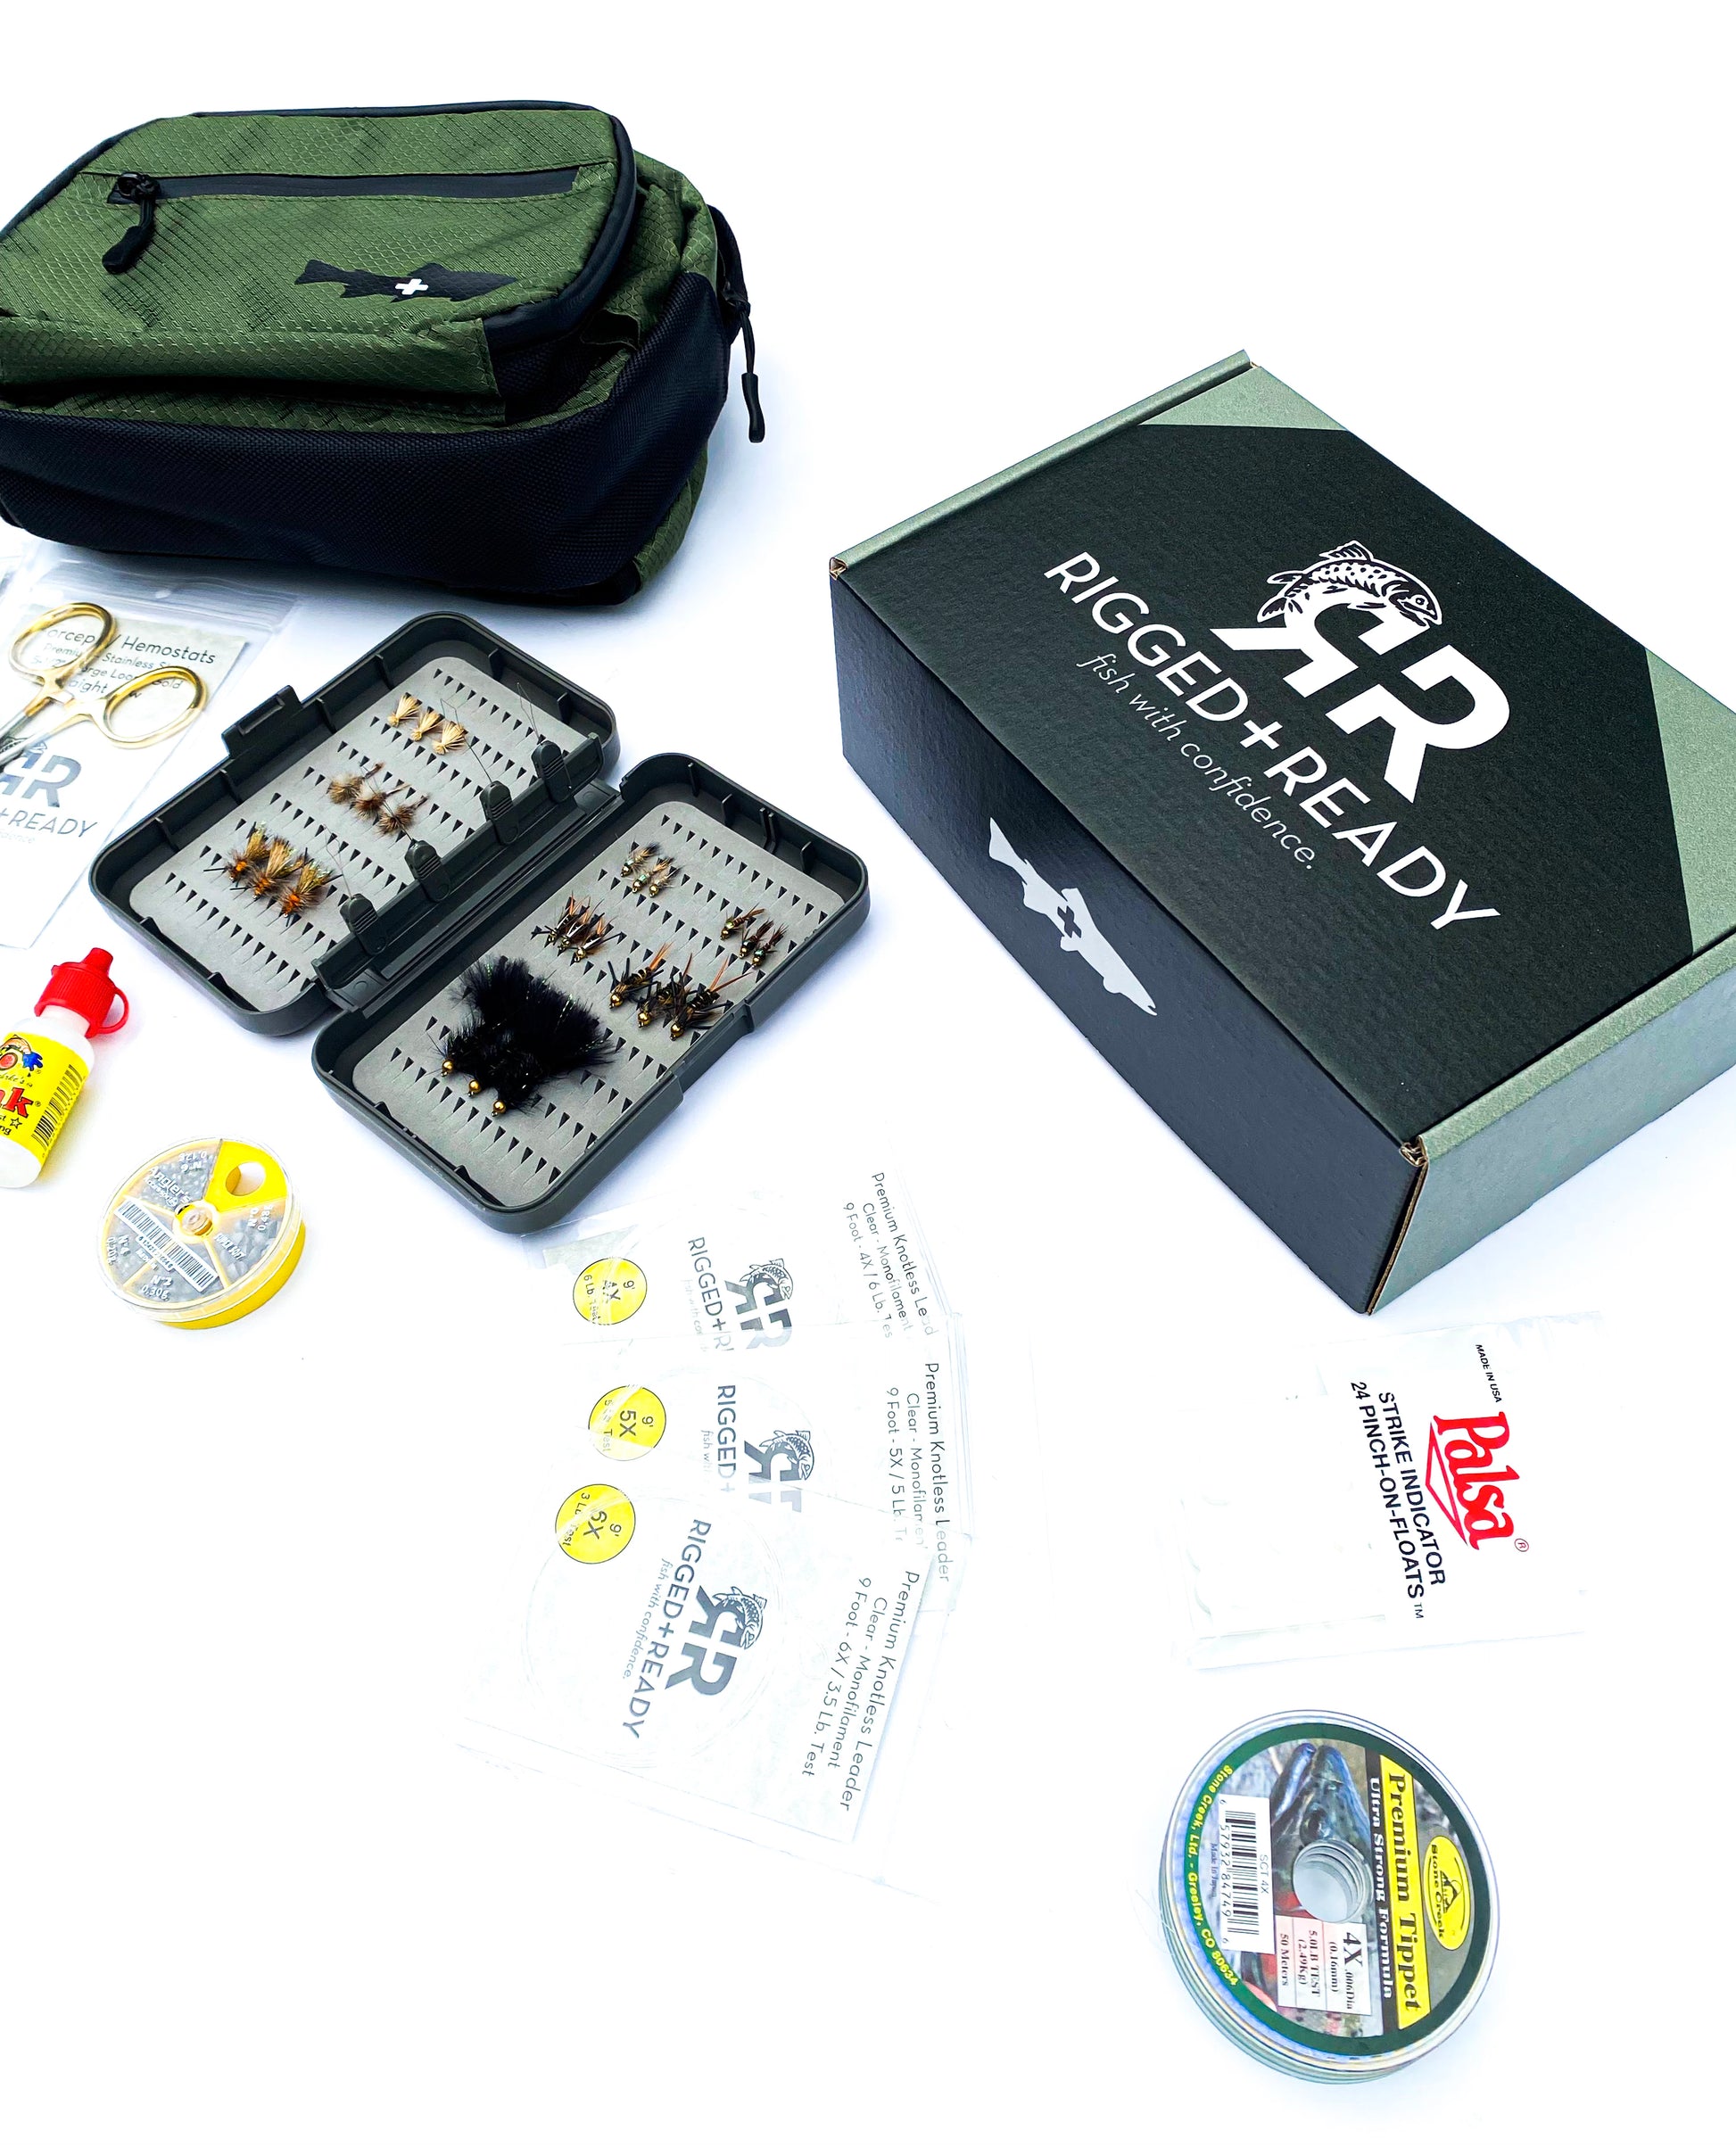 Fly Fishing Starter Kit  The Fully-Loaded Fly Fishing Pack – Rigged and  Ready